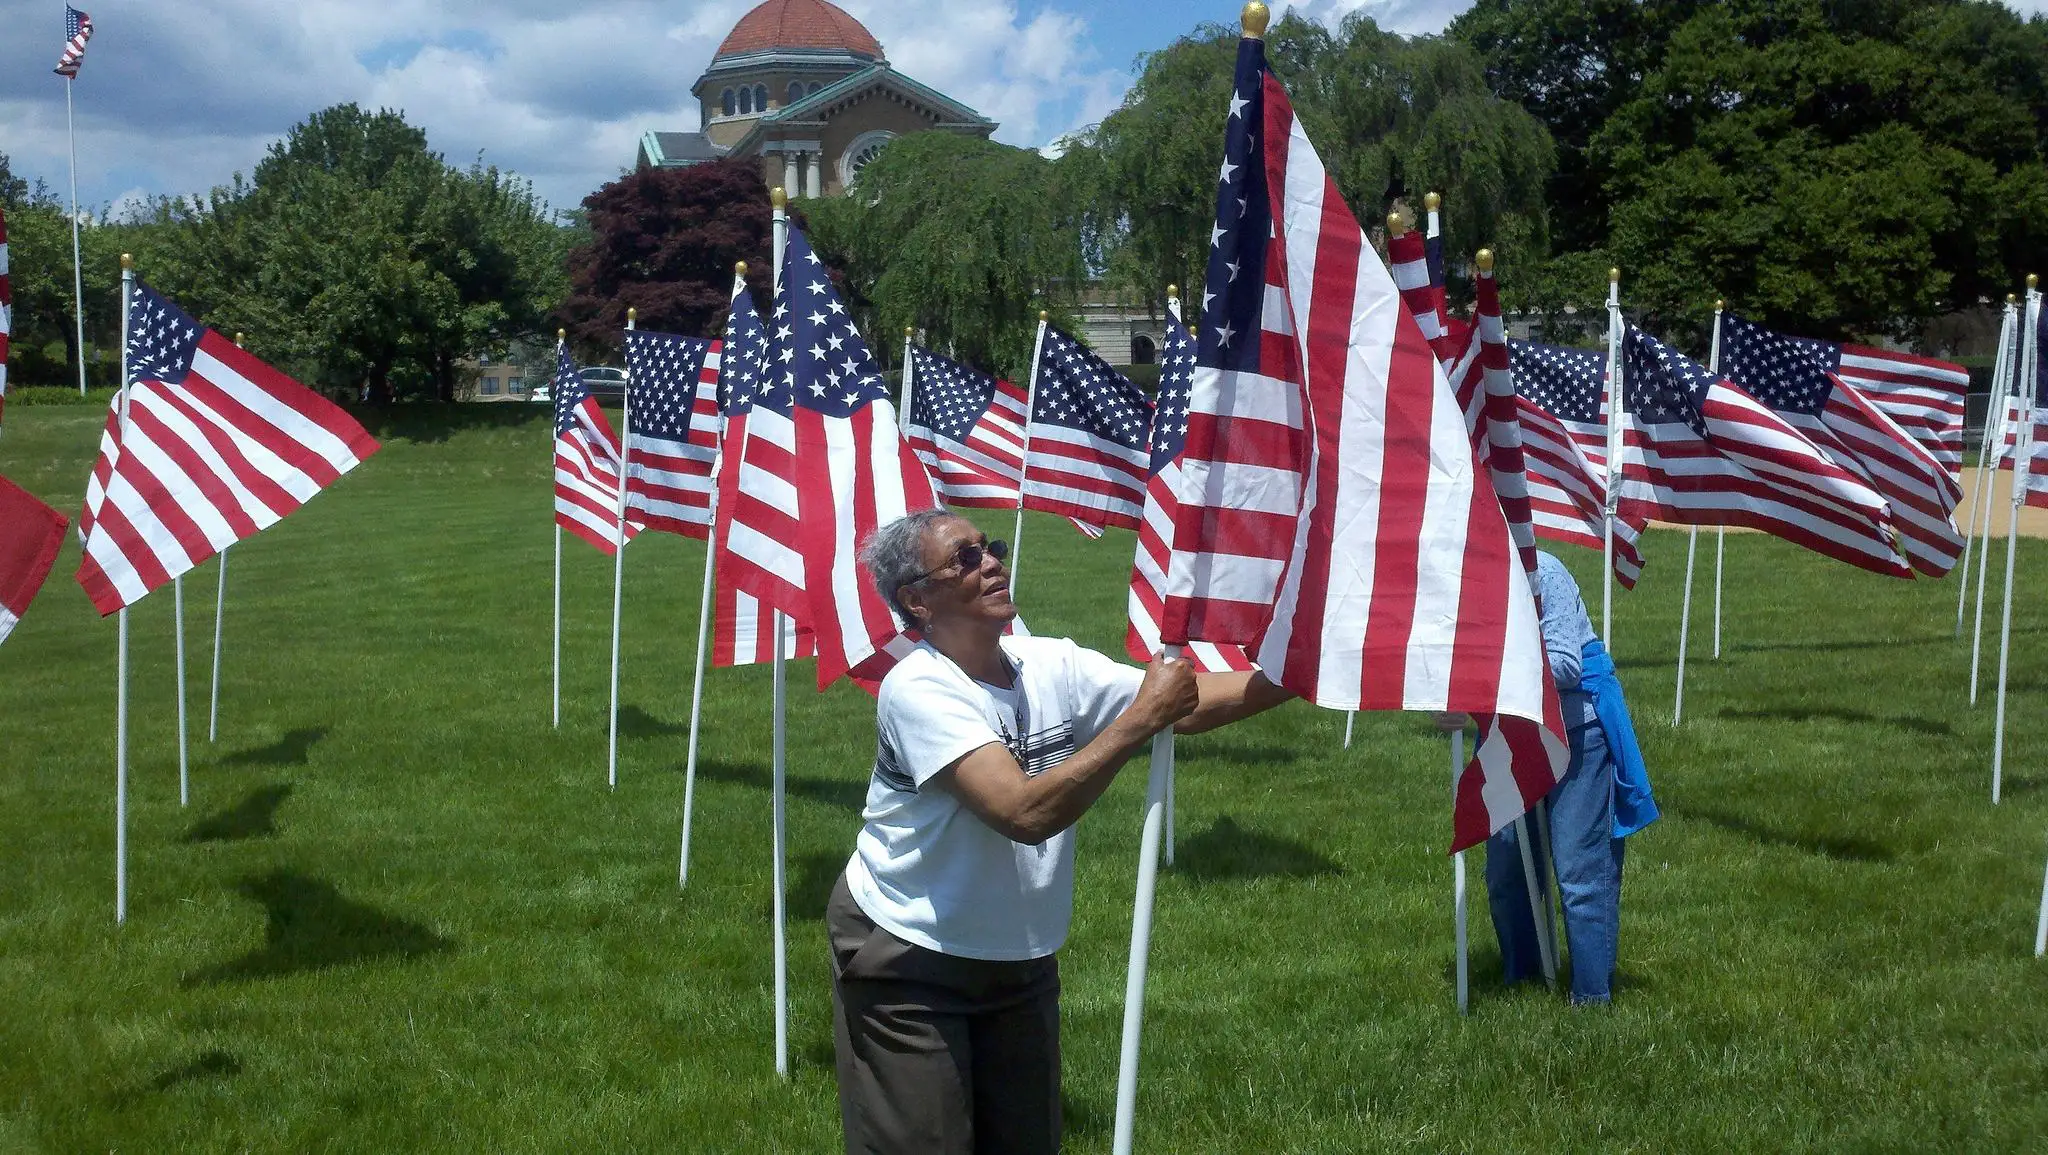 Charlestown (MD) Residents setting up display of Memorial Day flags